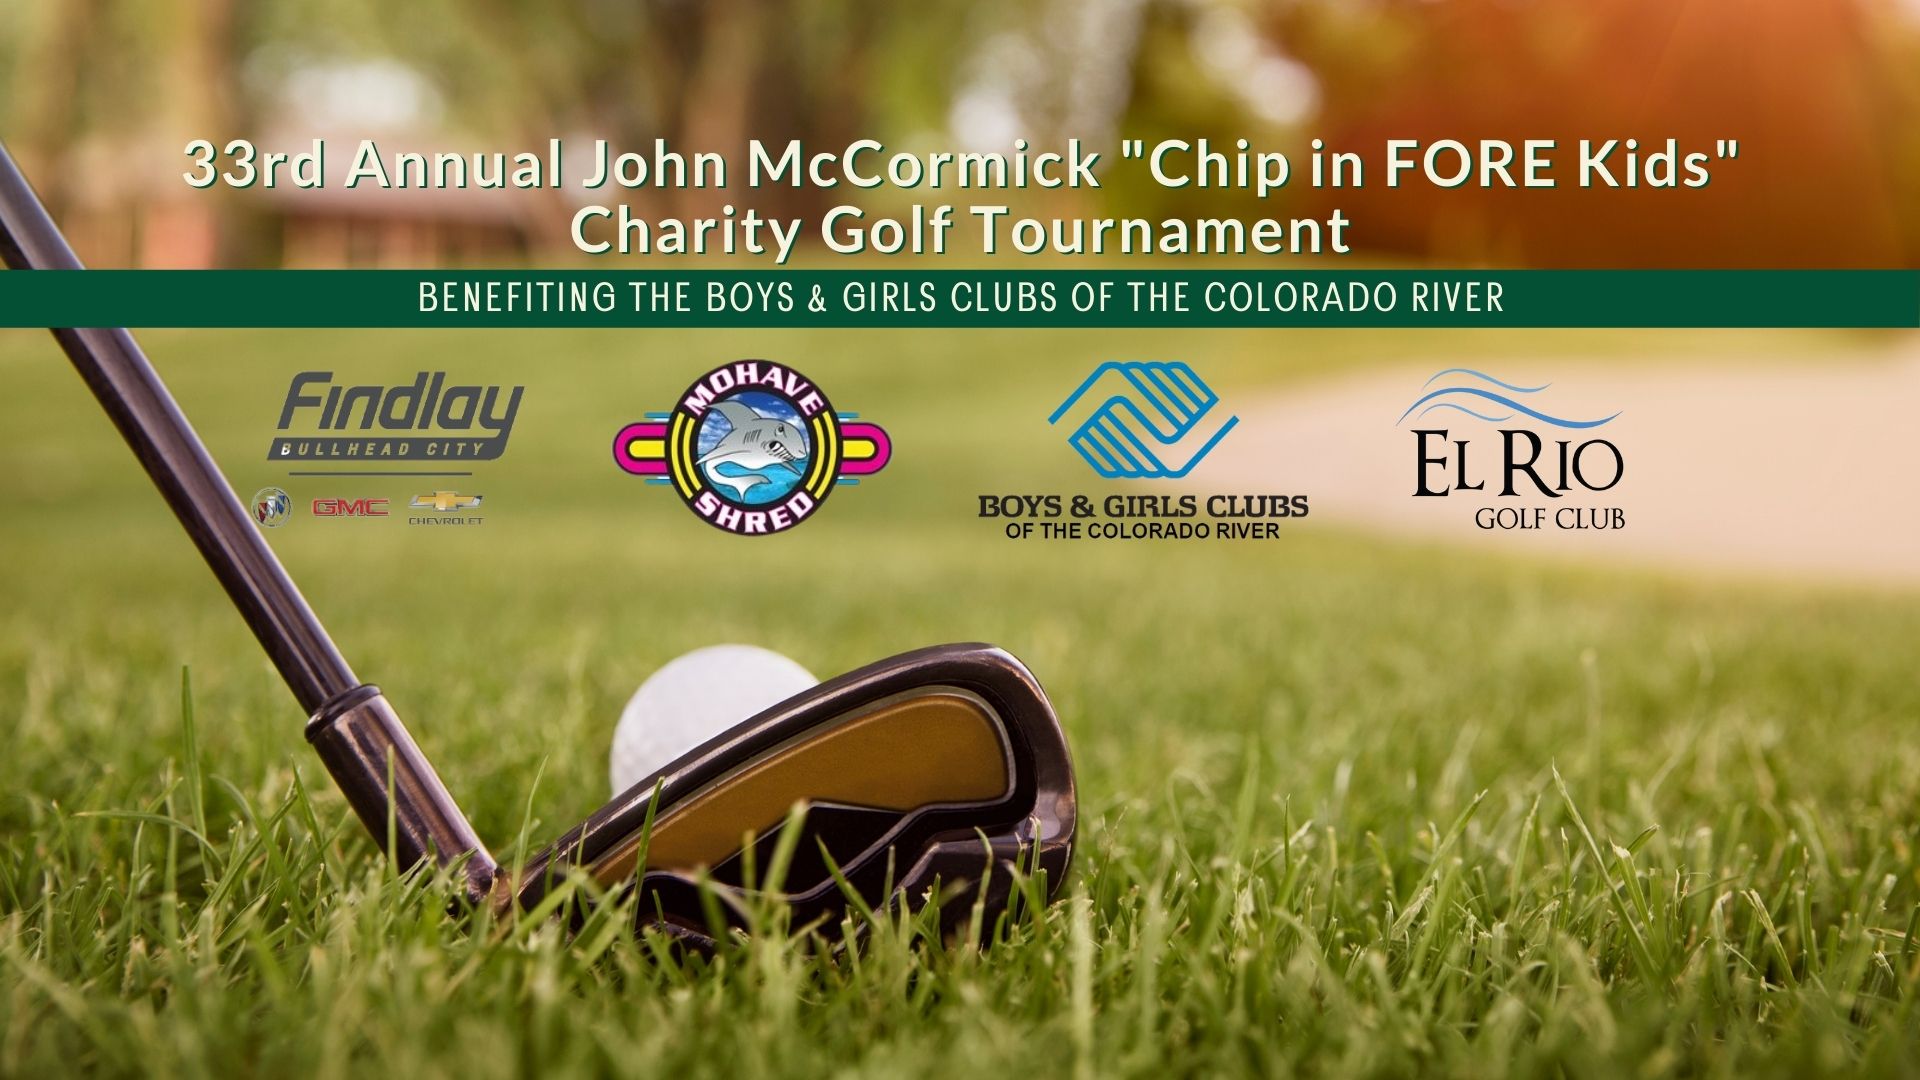 33rd Annual John McCormick “Chip In FORE Kids” Charity Golf Tournament